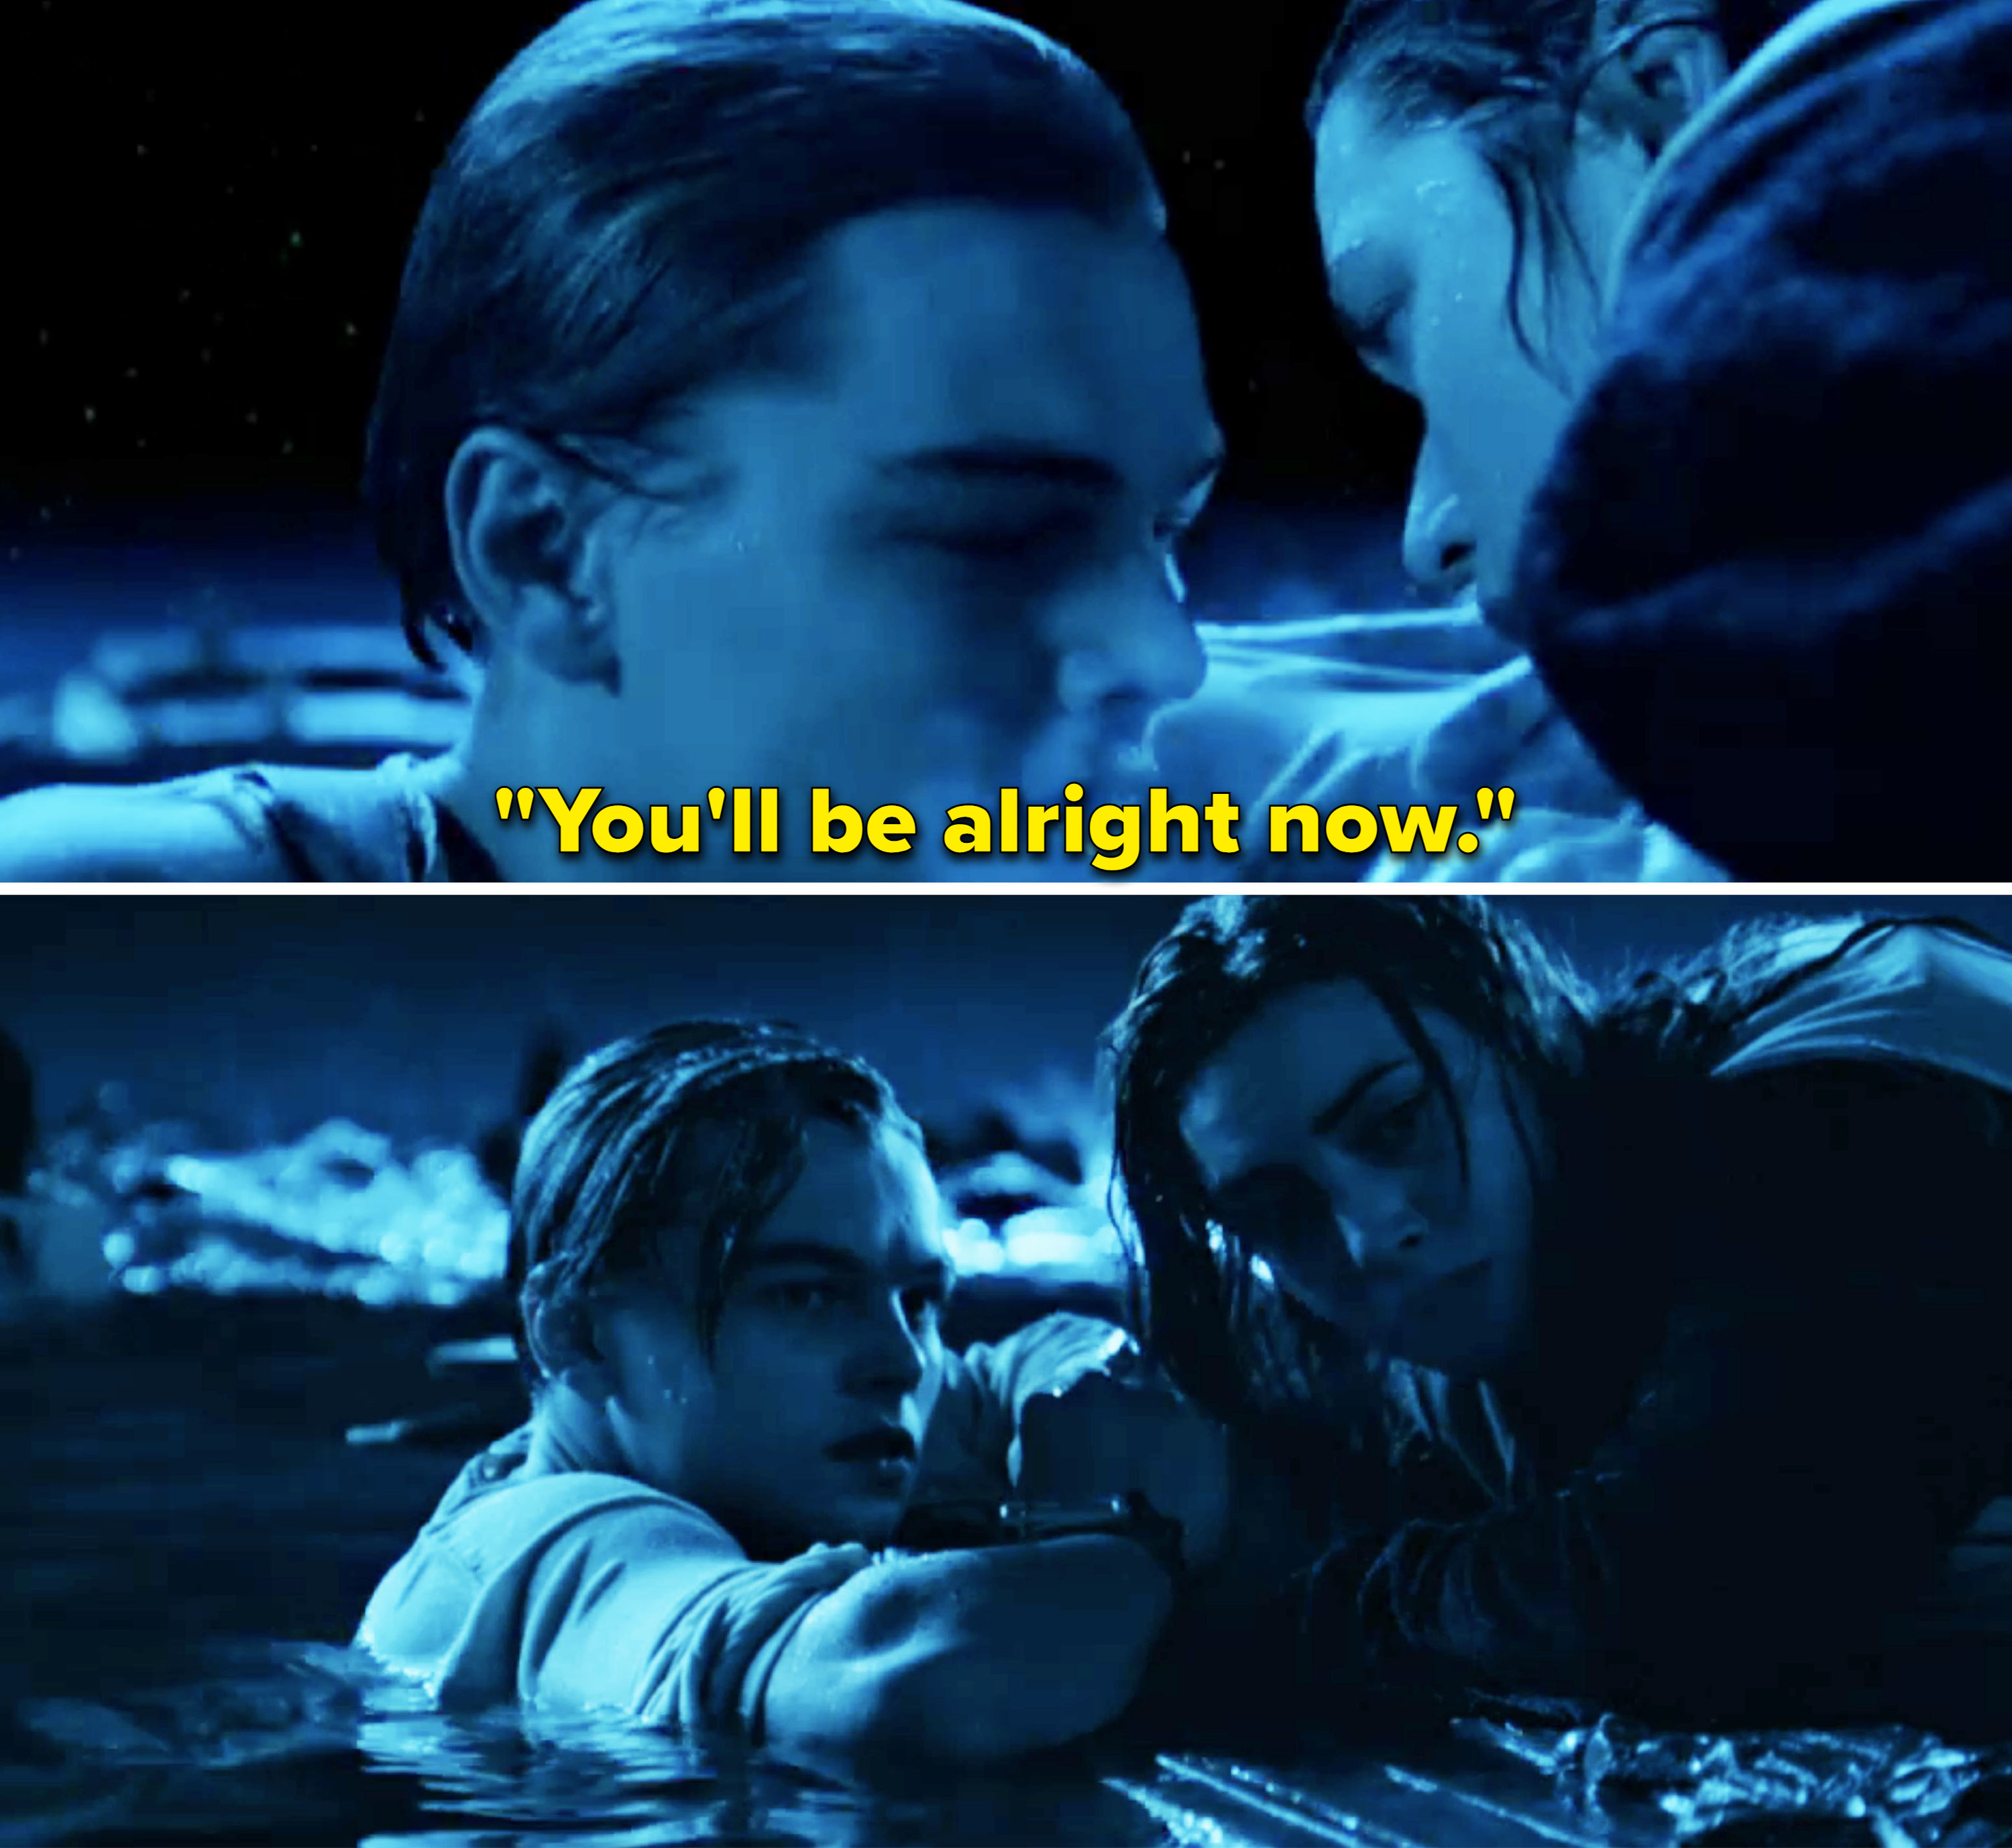 The Unsinkable Memes of 'Titanic' - The New York Times